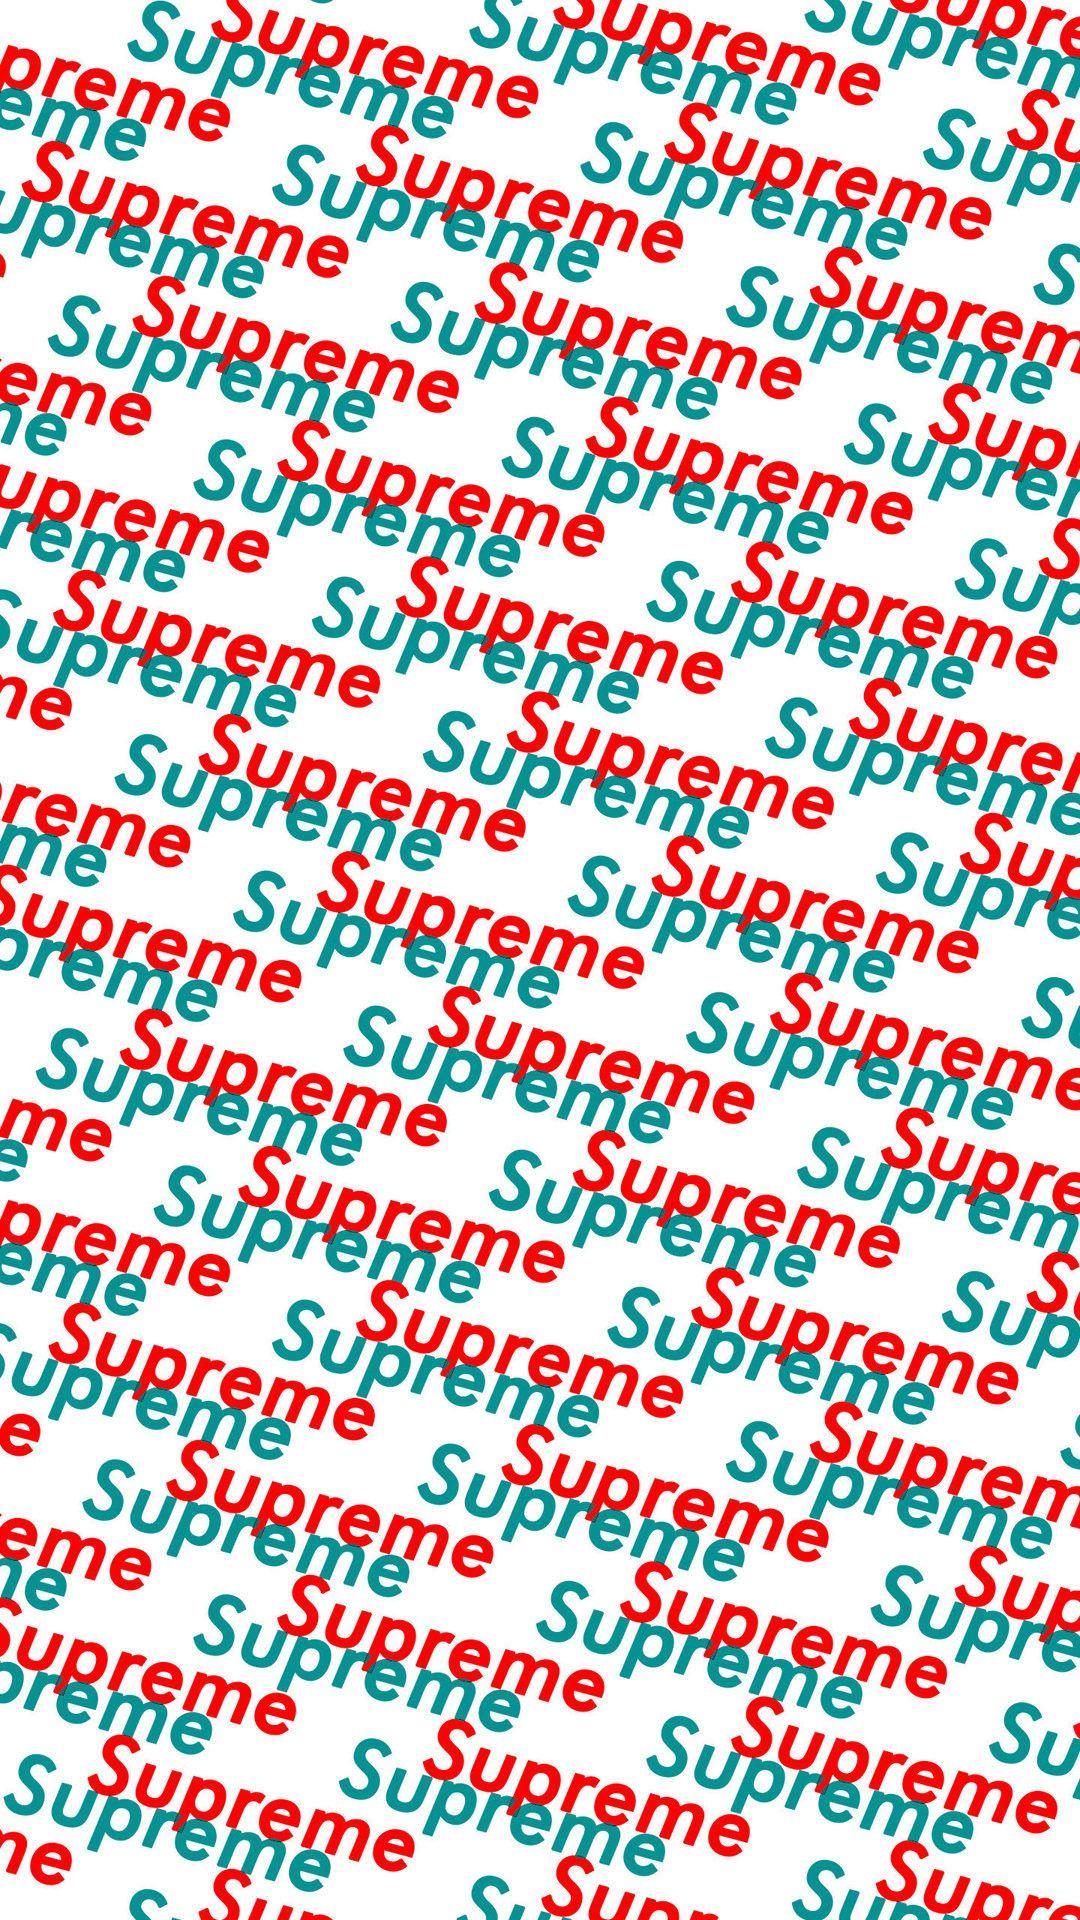 Supreme Logo Currency Background HD Supreme Wallpapers, HD Wallpapers